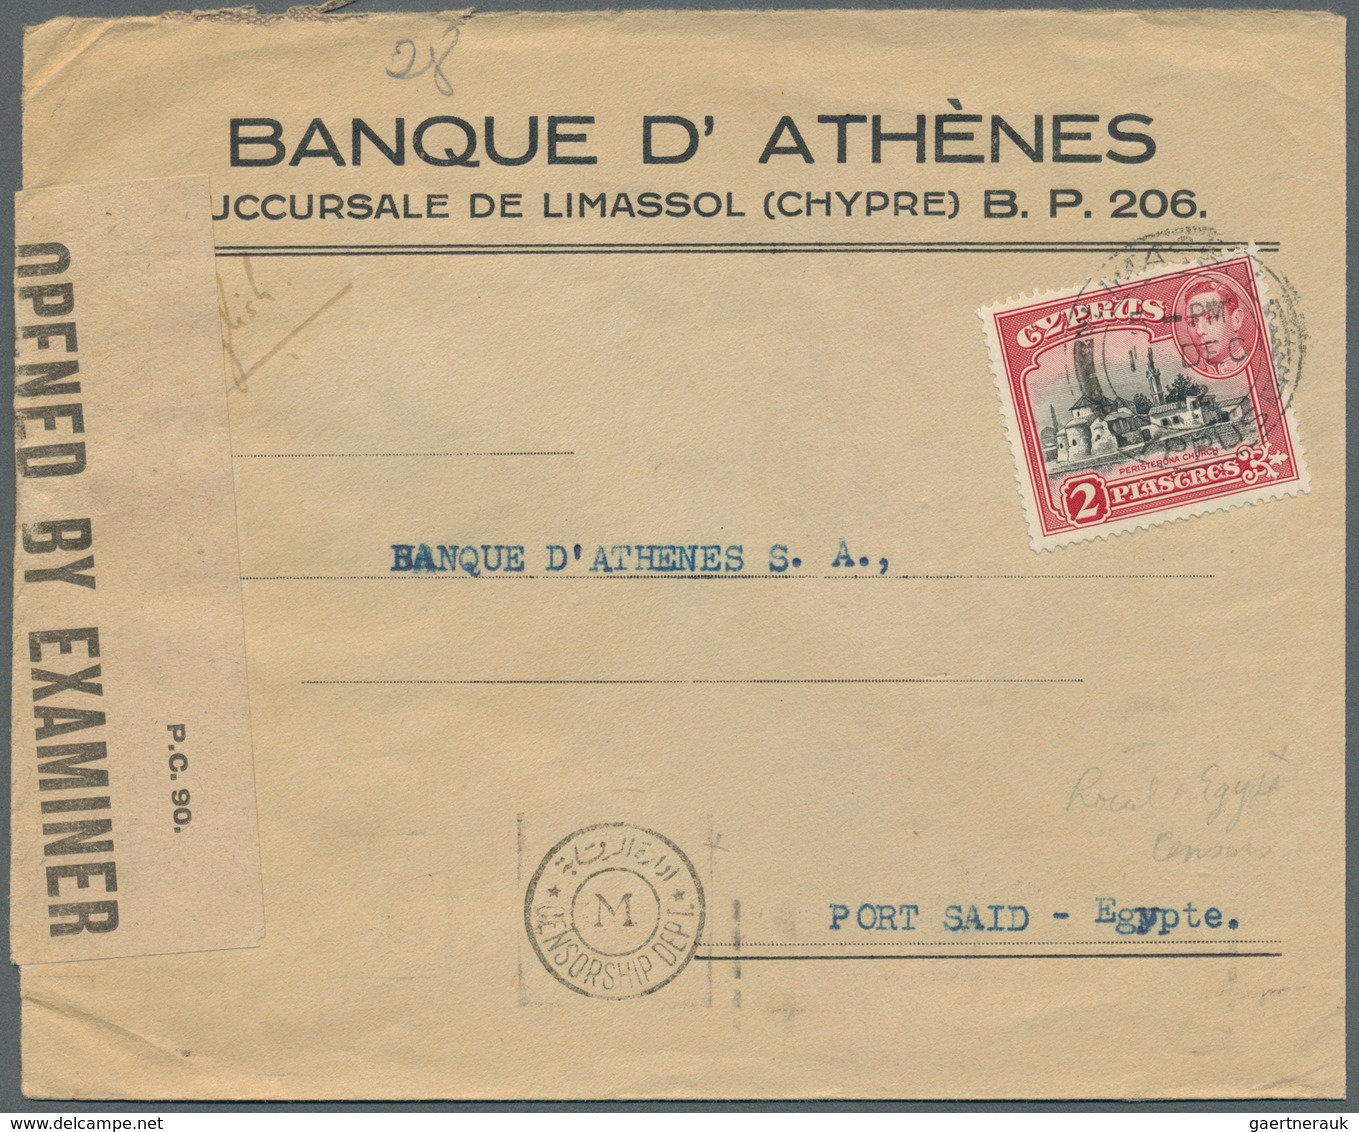 24502 Alle Welt: 1860's-1980's ca.: More than 1500 covers, postcards and postal stationery items worldwide